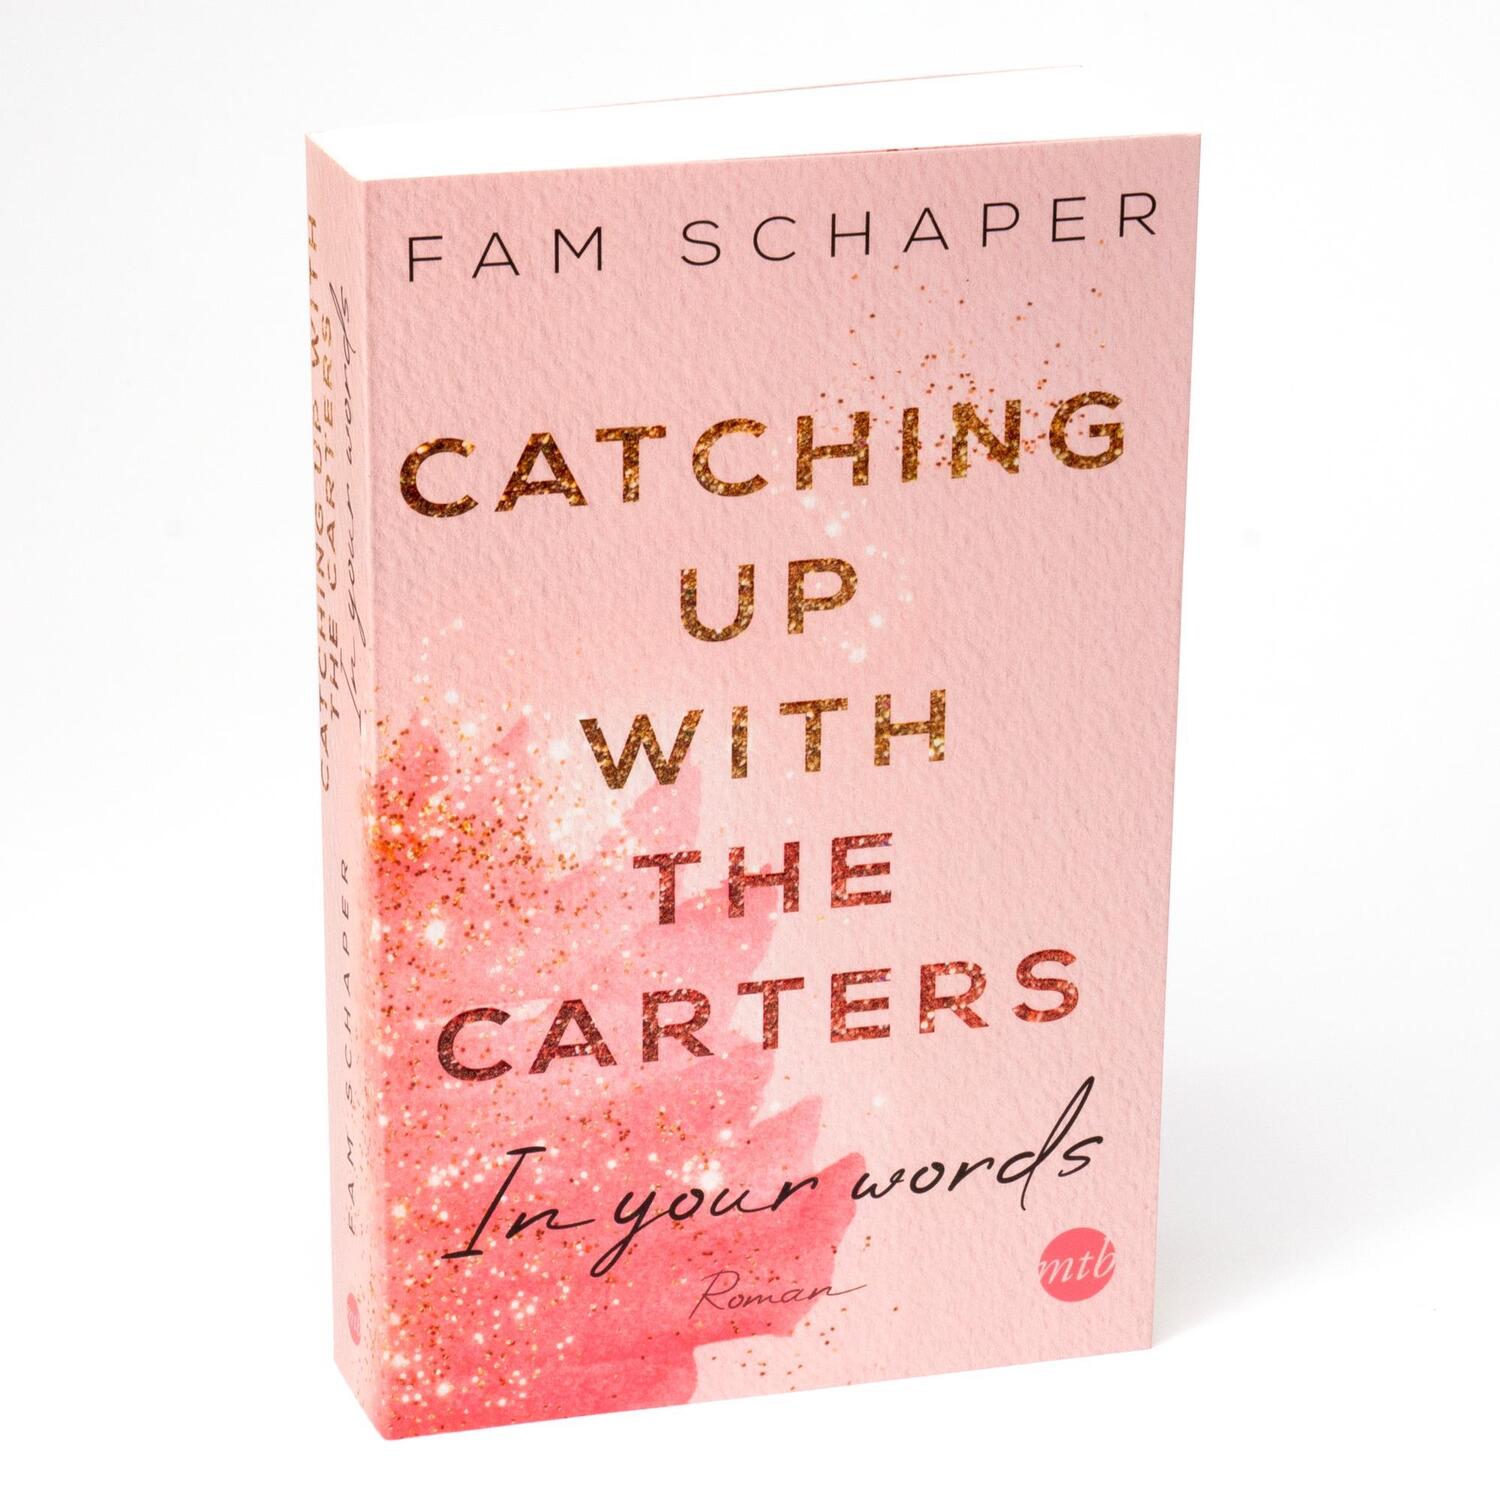 Bild: 9783745703023 | Catching up with the Carters - In your words | Fam Schaper | Buch